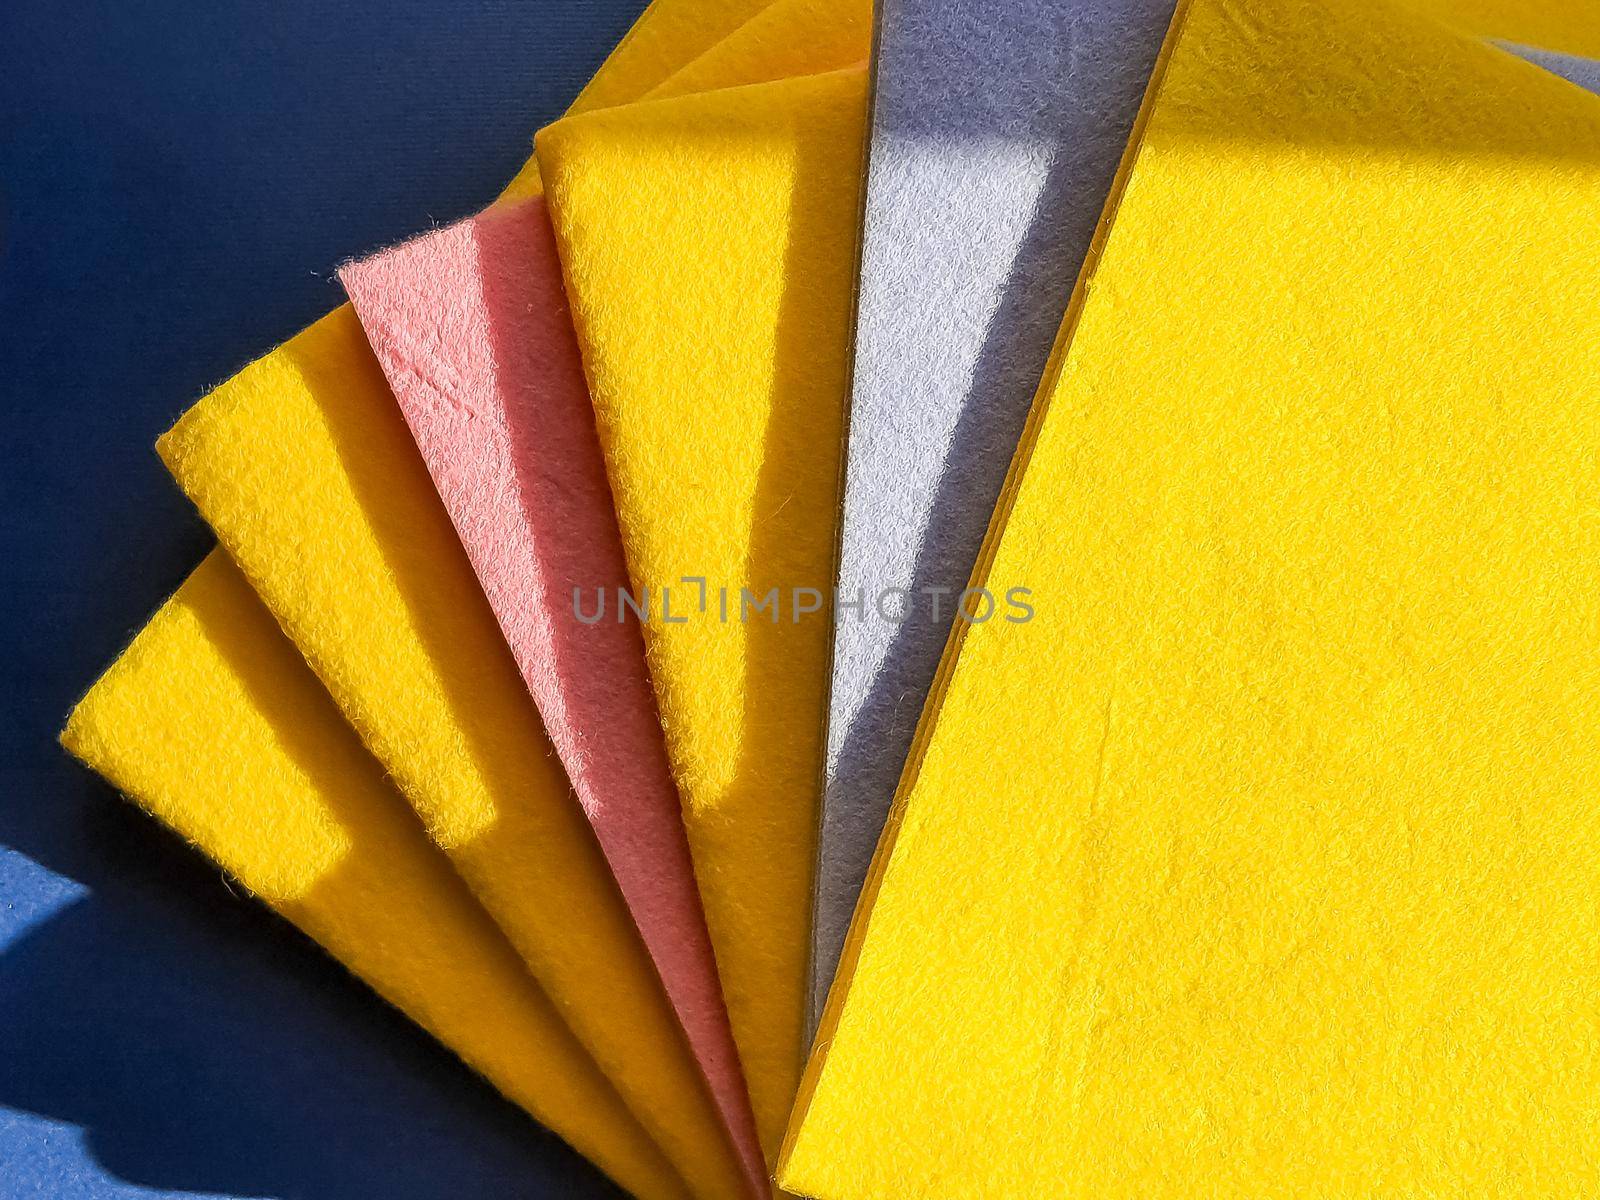 Colorful, dry microfiber cloths for different surfaces cleaning in kitchen, bathroom and other rooms. Cleaning service concept. Regular clean up.Multicolored cleaning rags by YuliaYaspe1979